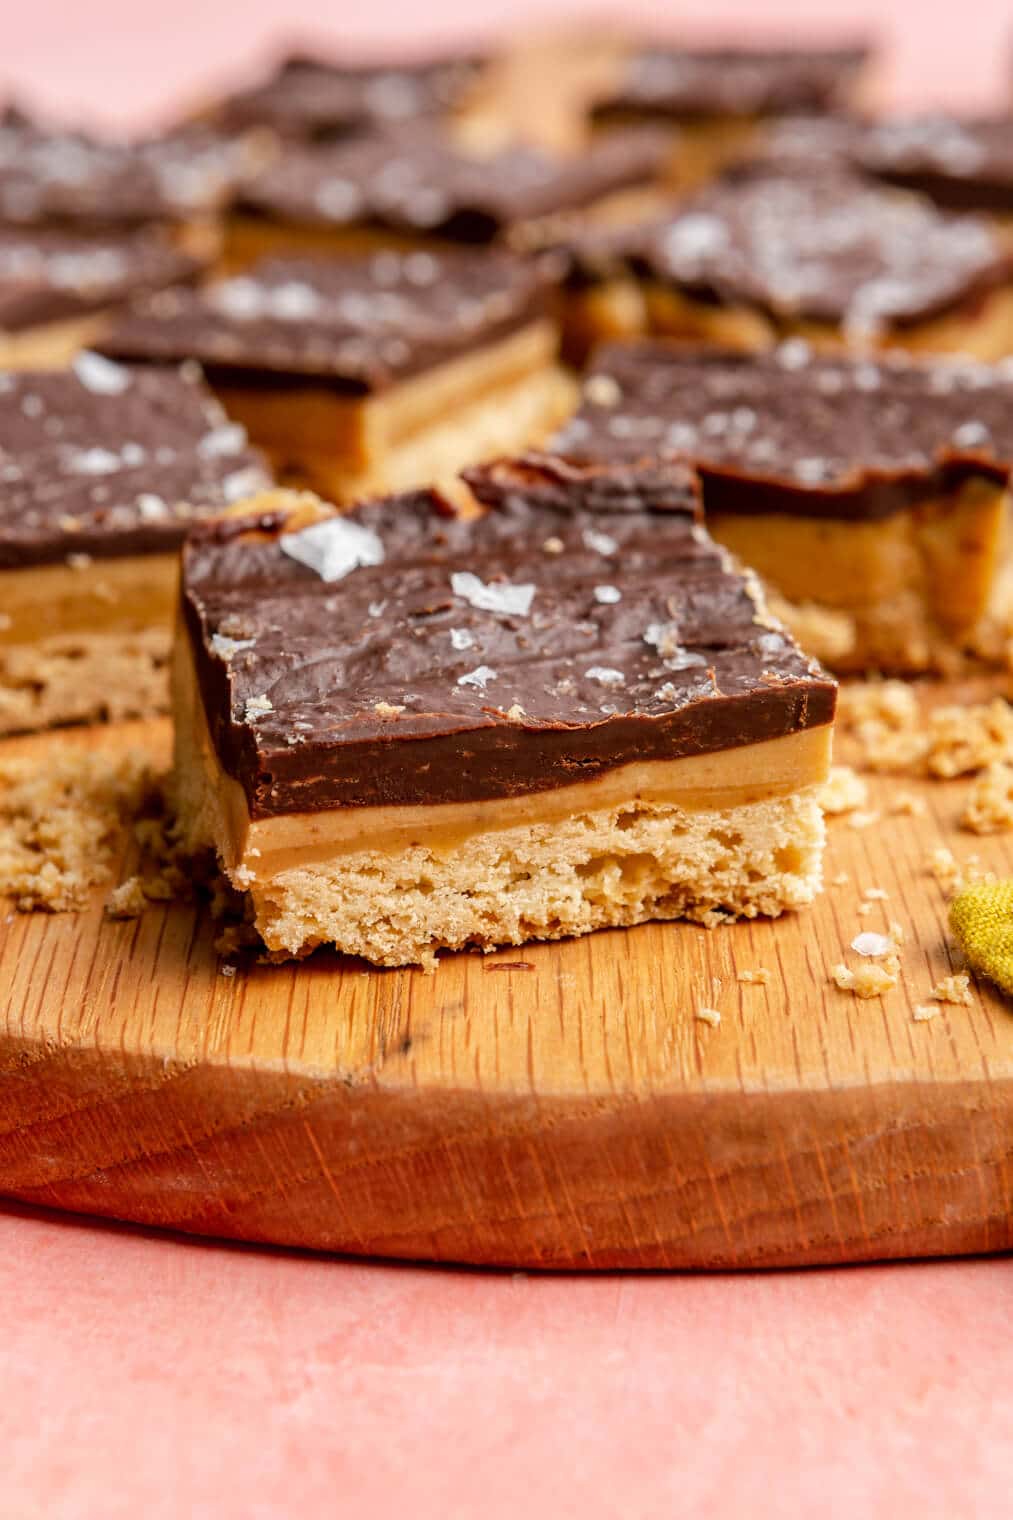 Side view of millionaire shortbread on a wooden cutting board. You can see the three layers of shortbread, caramel, and chocolate ganache that is topped with a flaky sea sat.